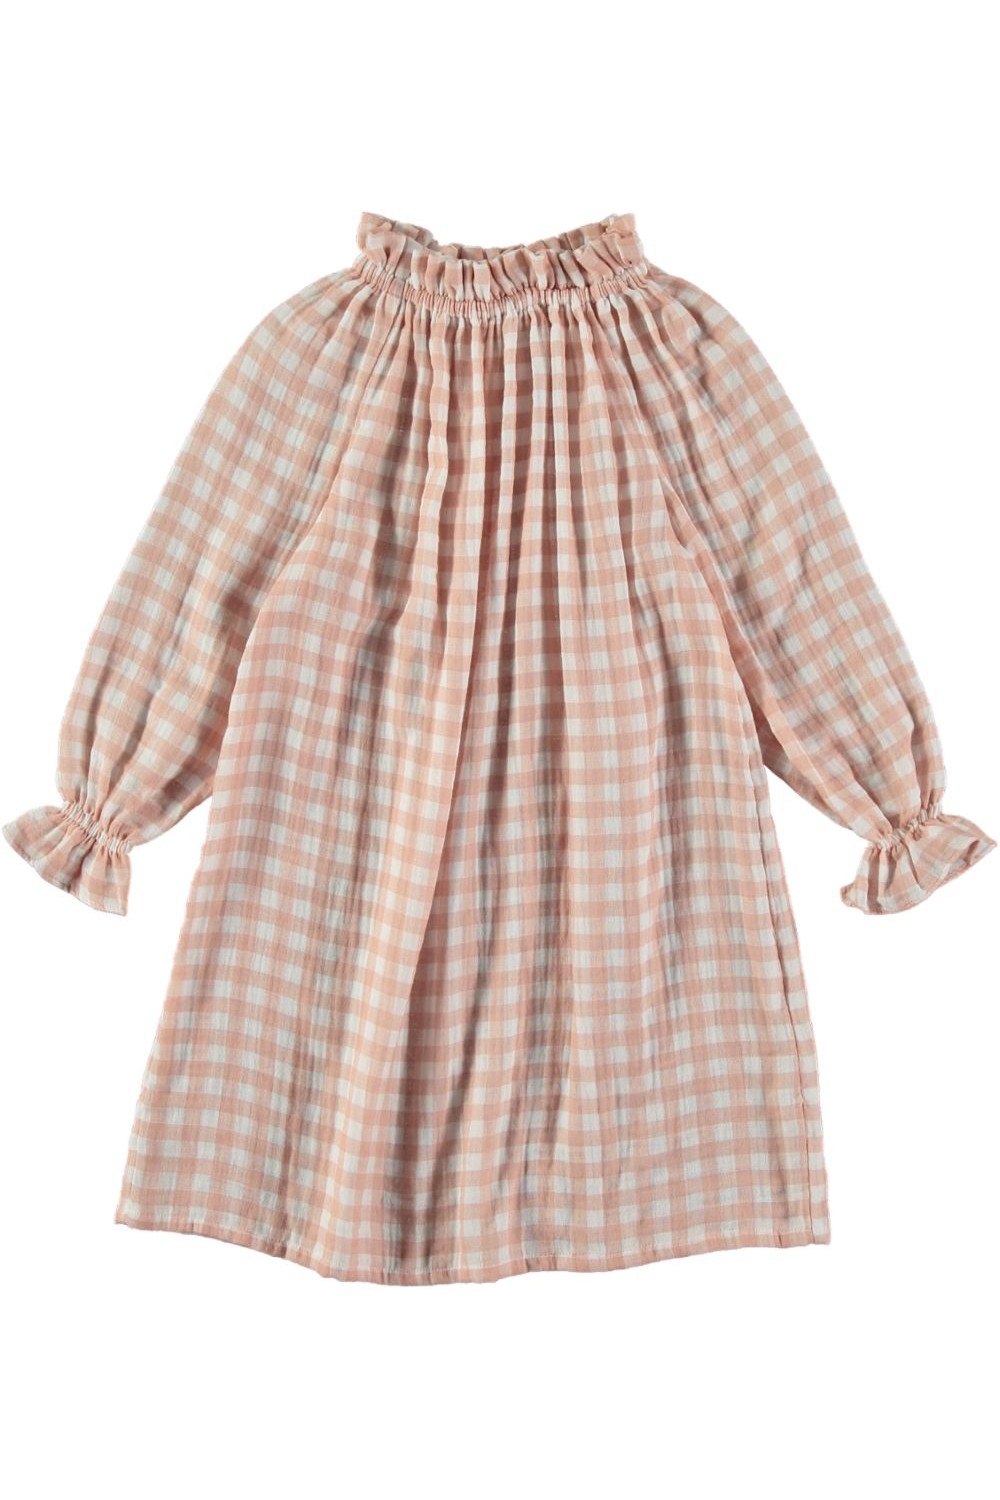 Sissi pink checked girl's nightdress